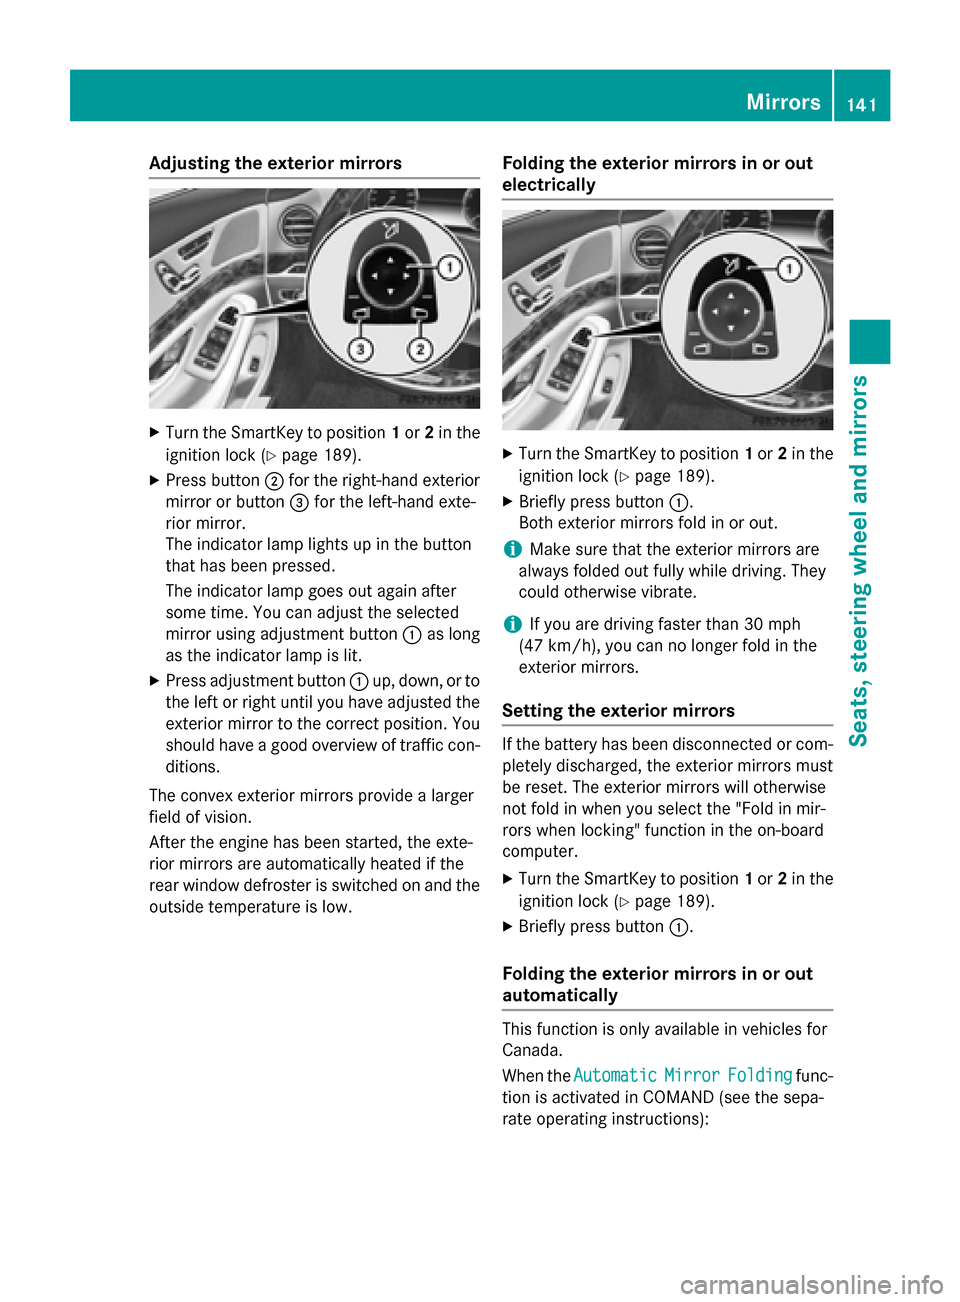 MERCEDES-BENZ S-Class 2015 W222 Owners Guide Adjusting the exterior mirrors
X
Turn the SmartKey to position 1or 2in the
ignition lock (Y page 189).
X Press button ;for the right-hand exterior
mirror or button =for the left-hand exte-
rior mirror